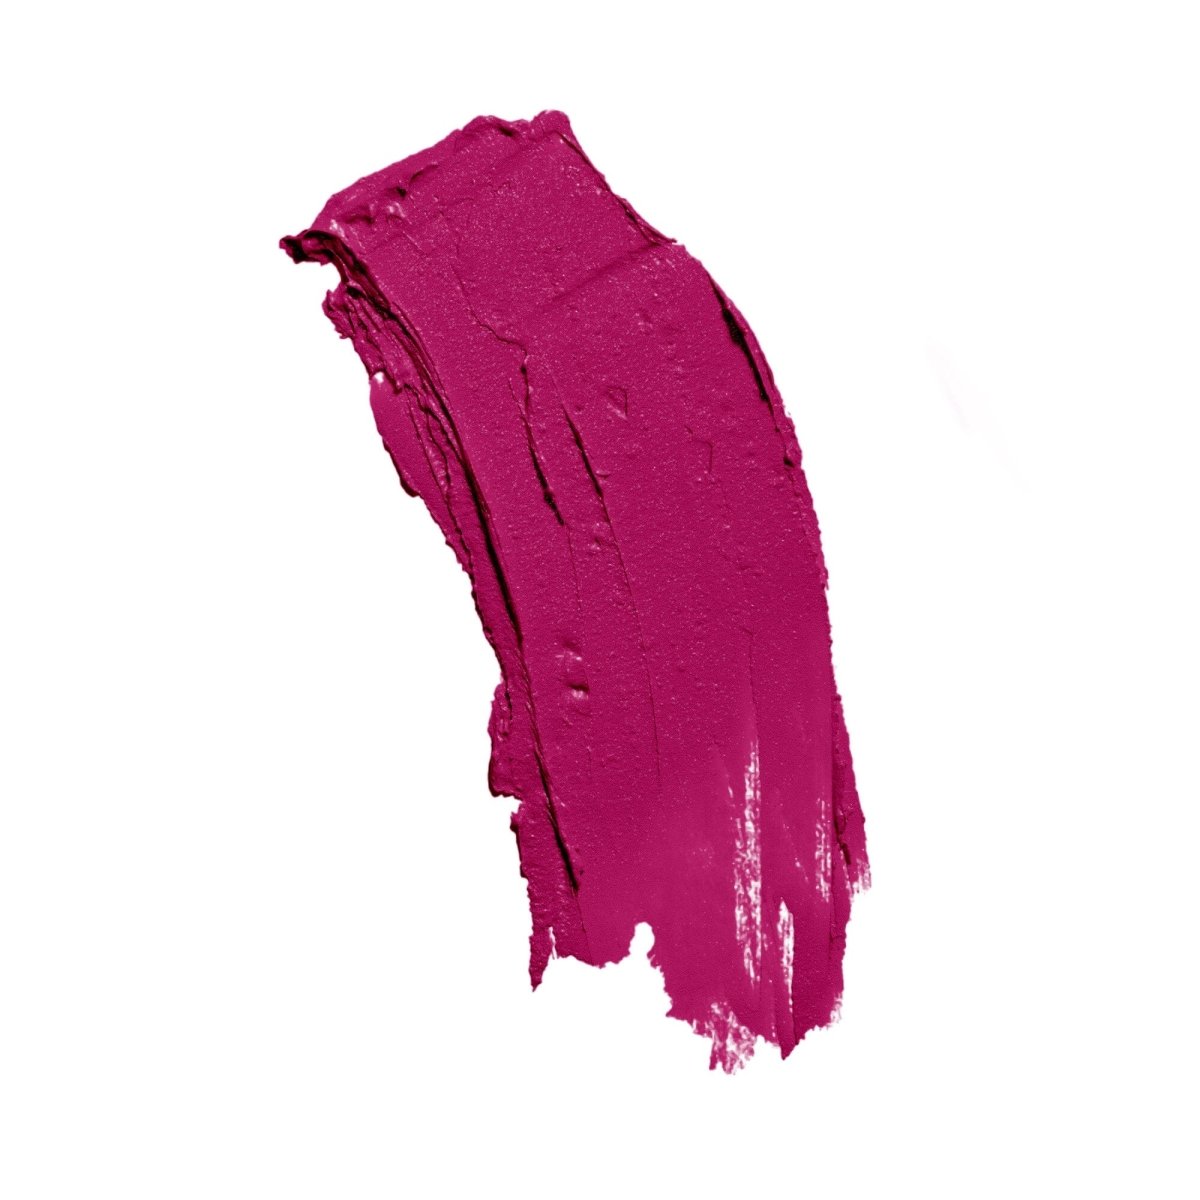 Close-up view of a cruelty-free matte swatch lipstick w, resting on a white surface